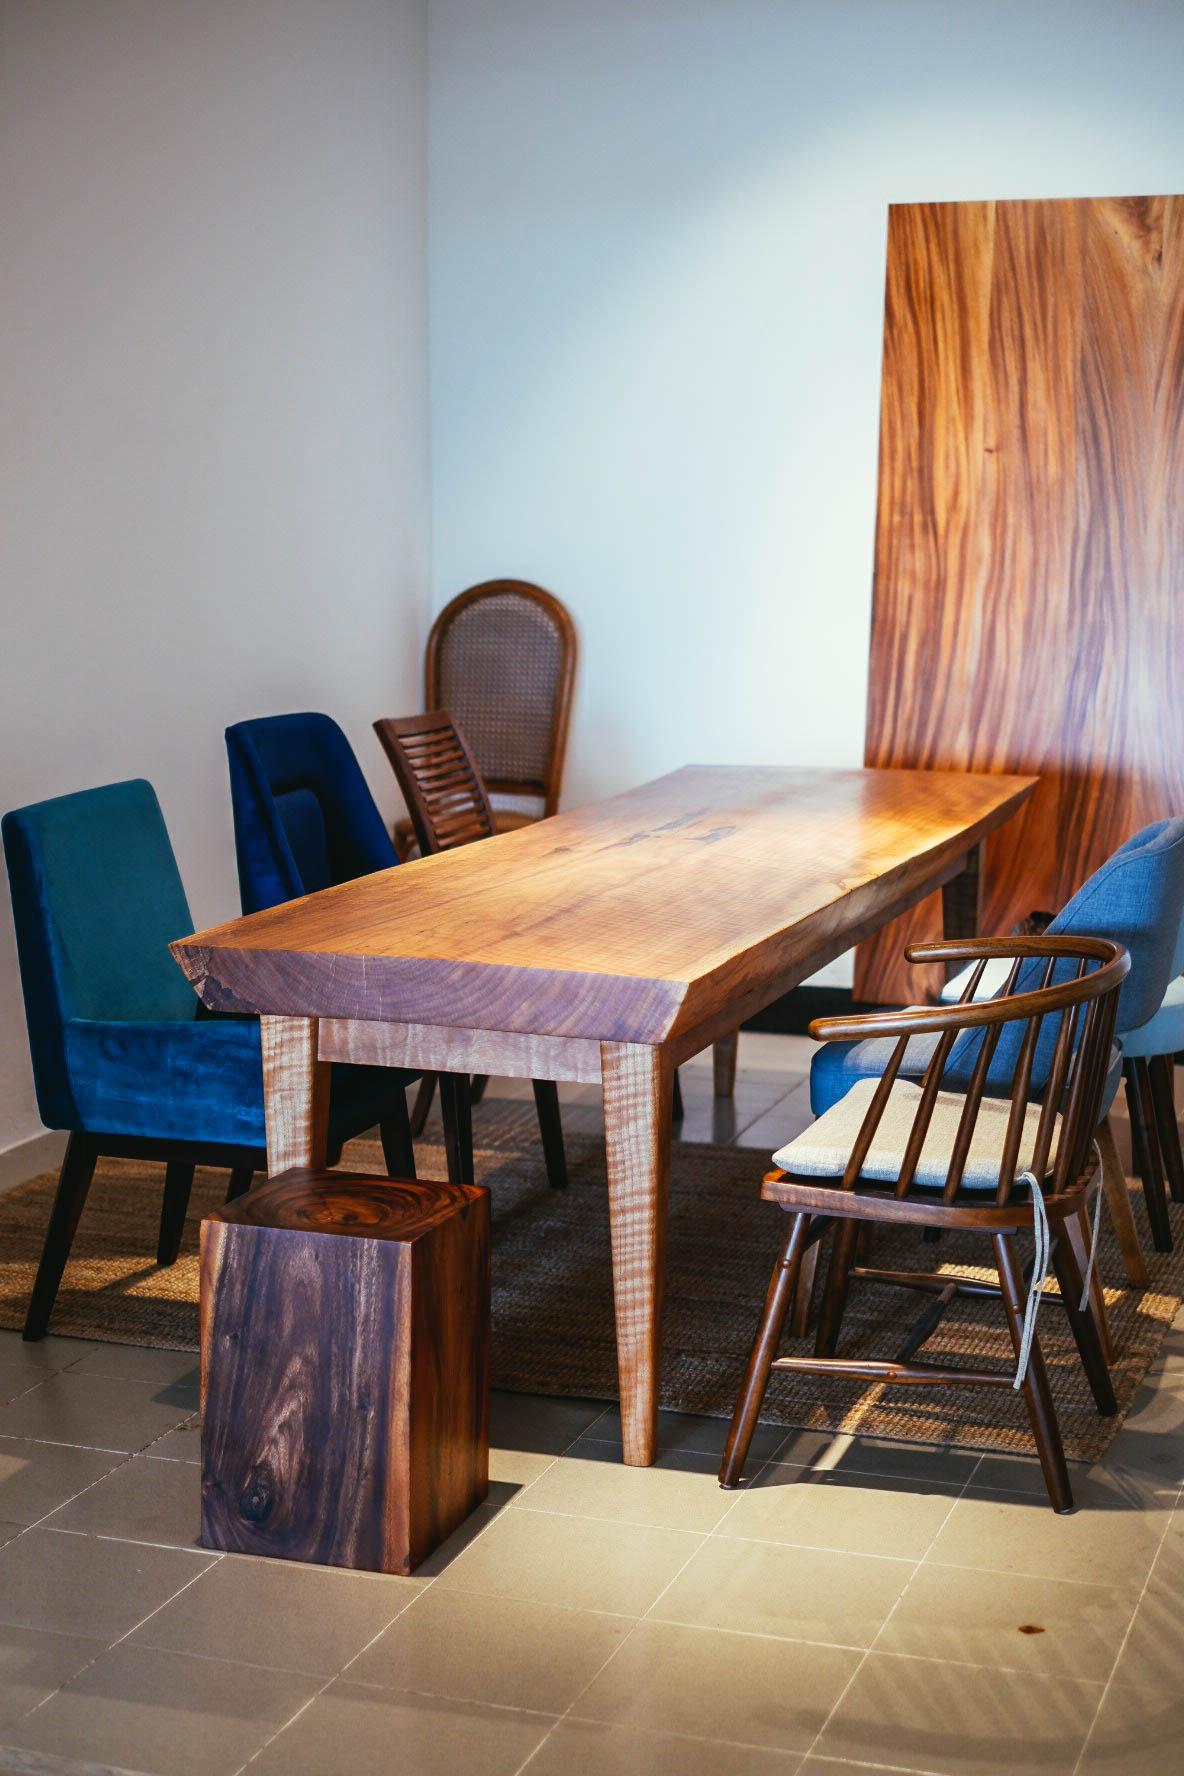 Dad's Woods Penang: Finding the Beauty of Malaysian Bespoke Wooden Furniture 